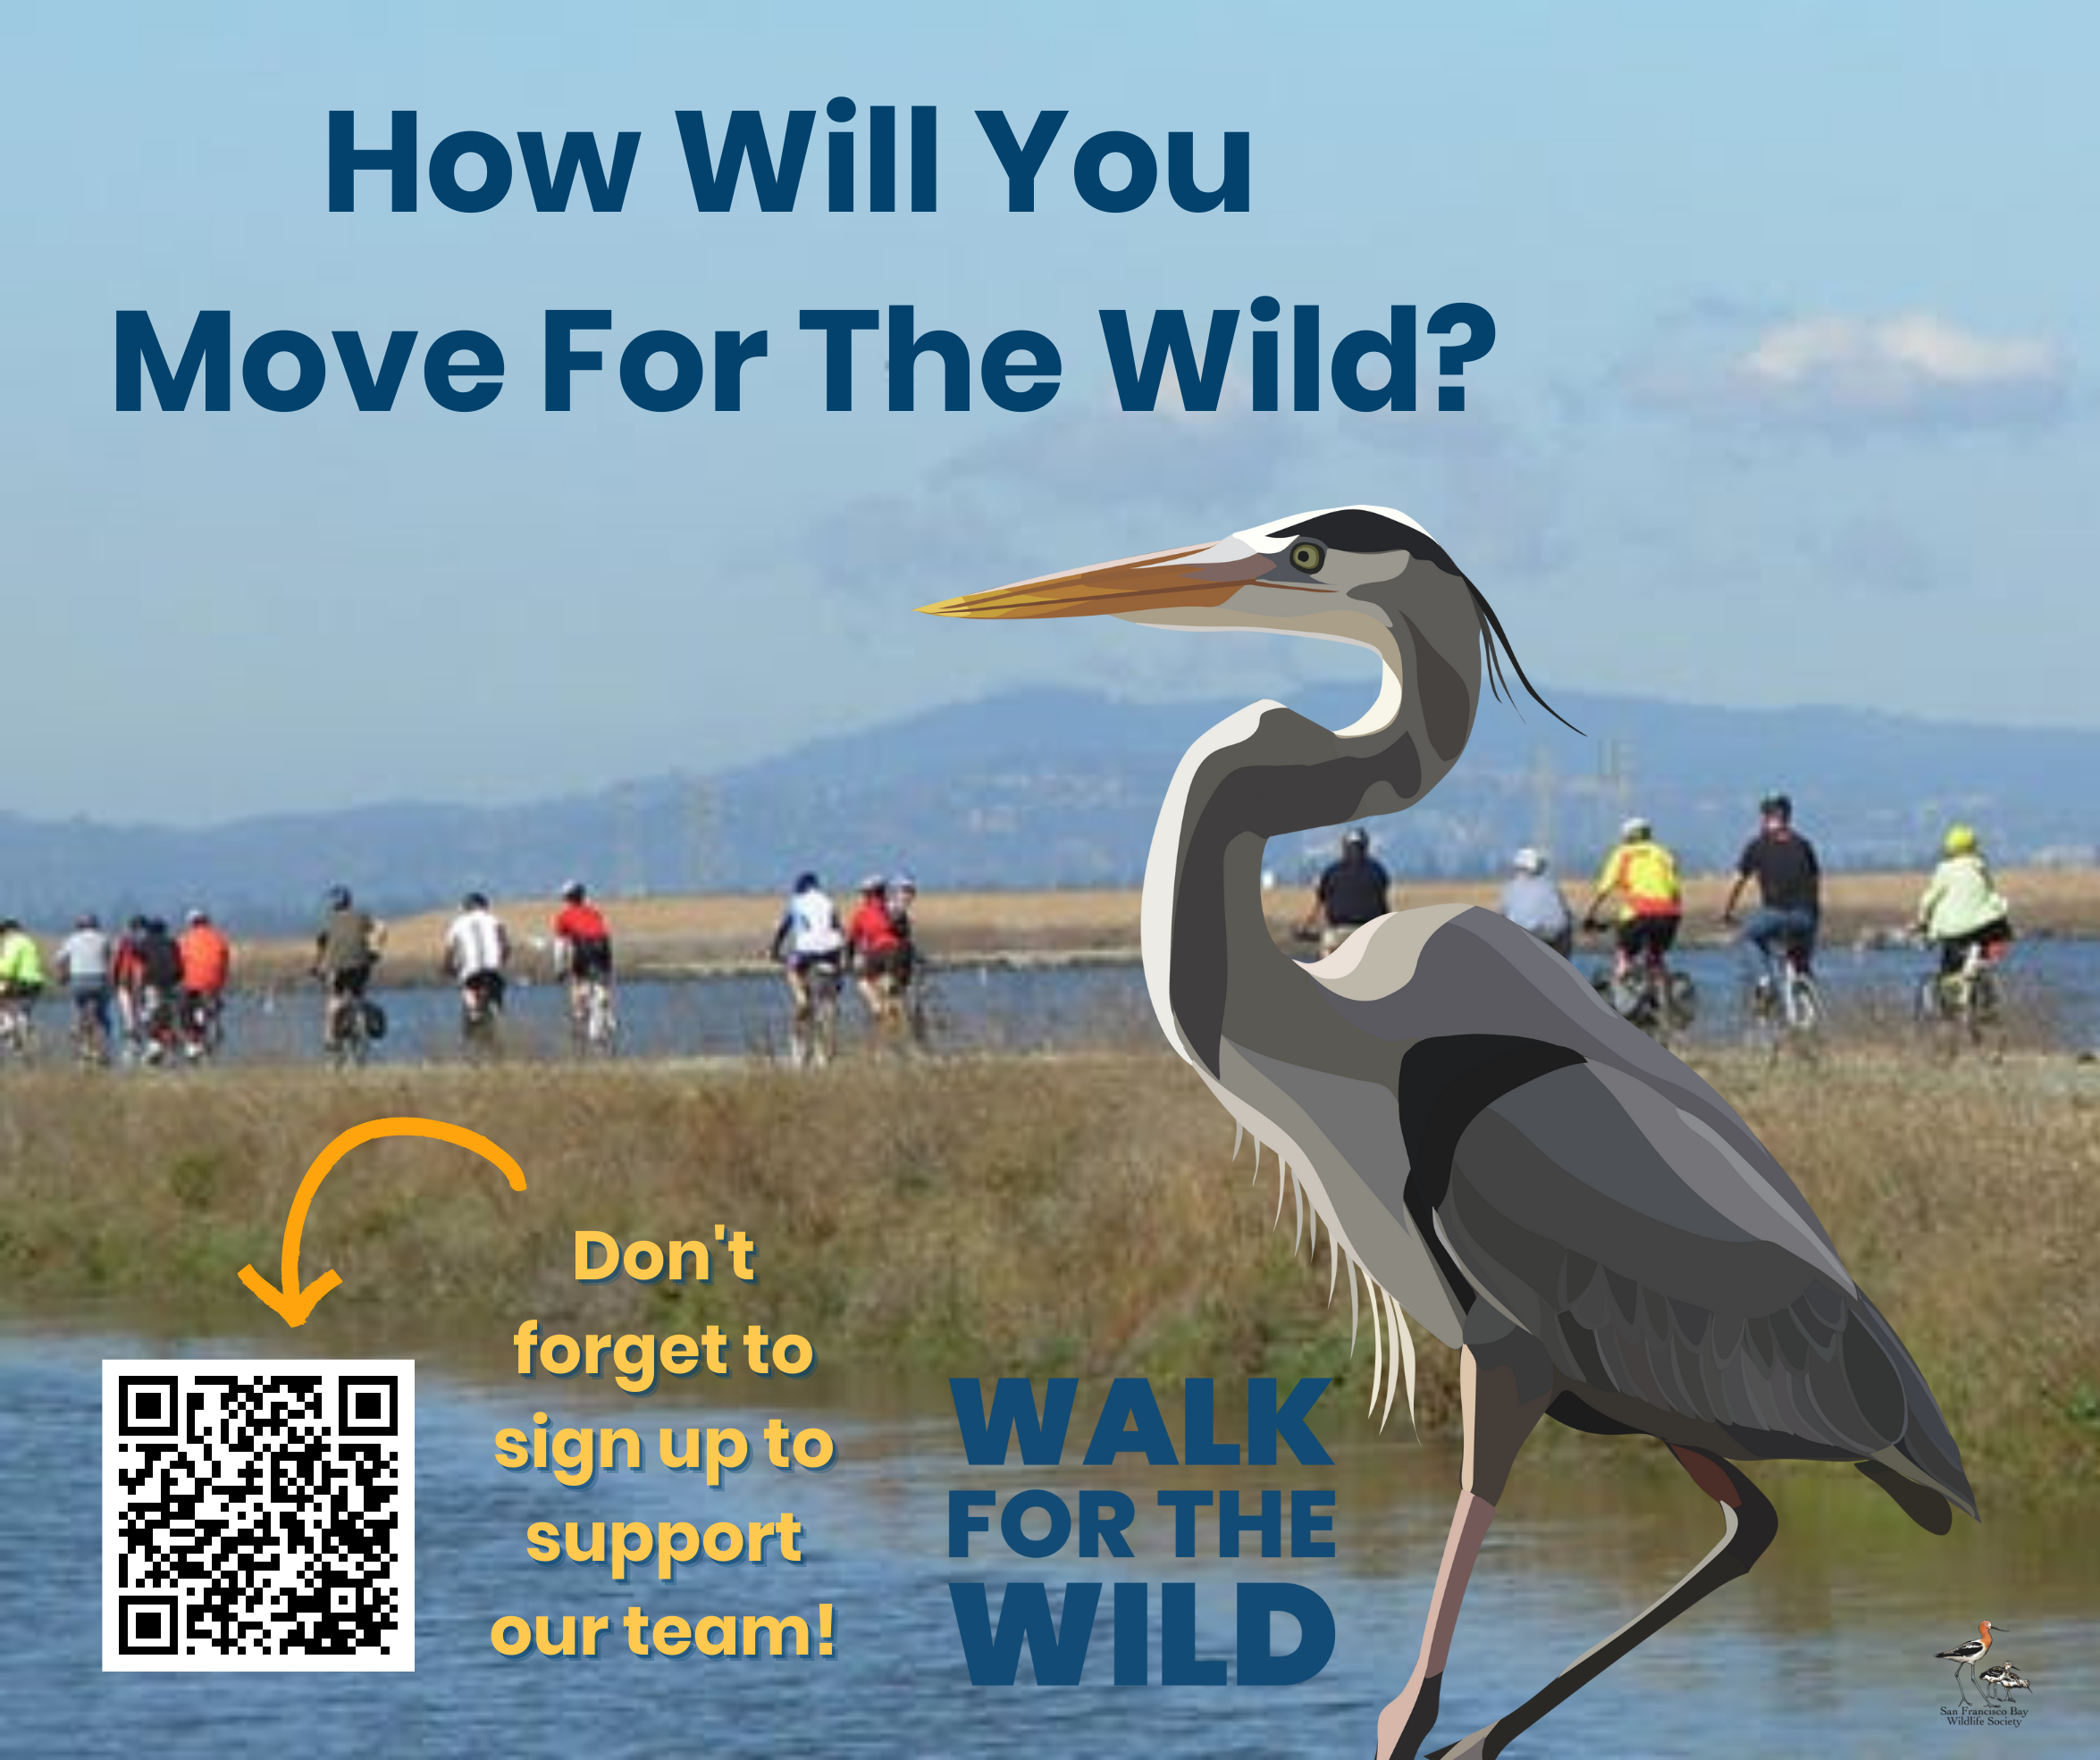 Walk for the Wild, Celebrating 50 Years of Conservation at Don Edwards SF Bay NWR, 2022